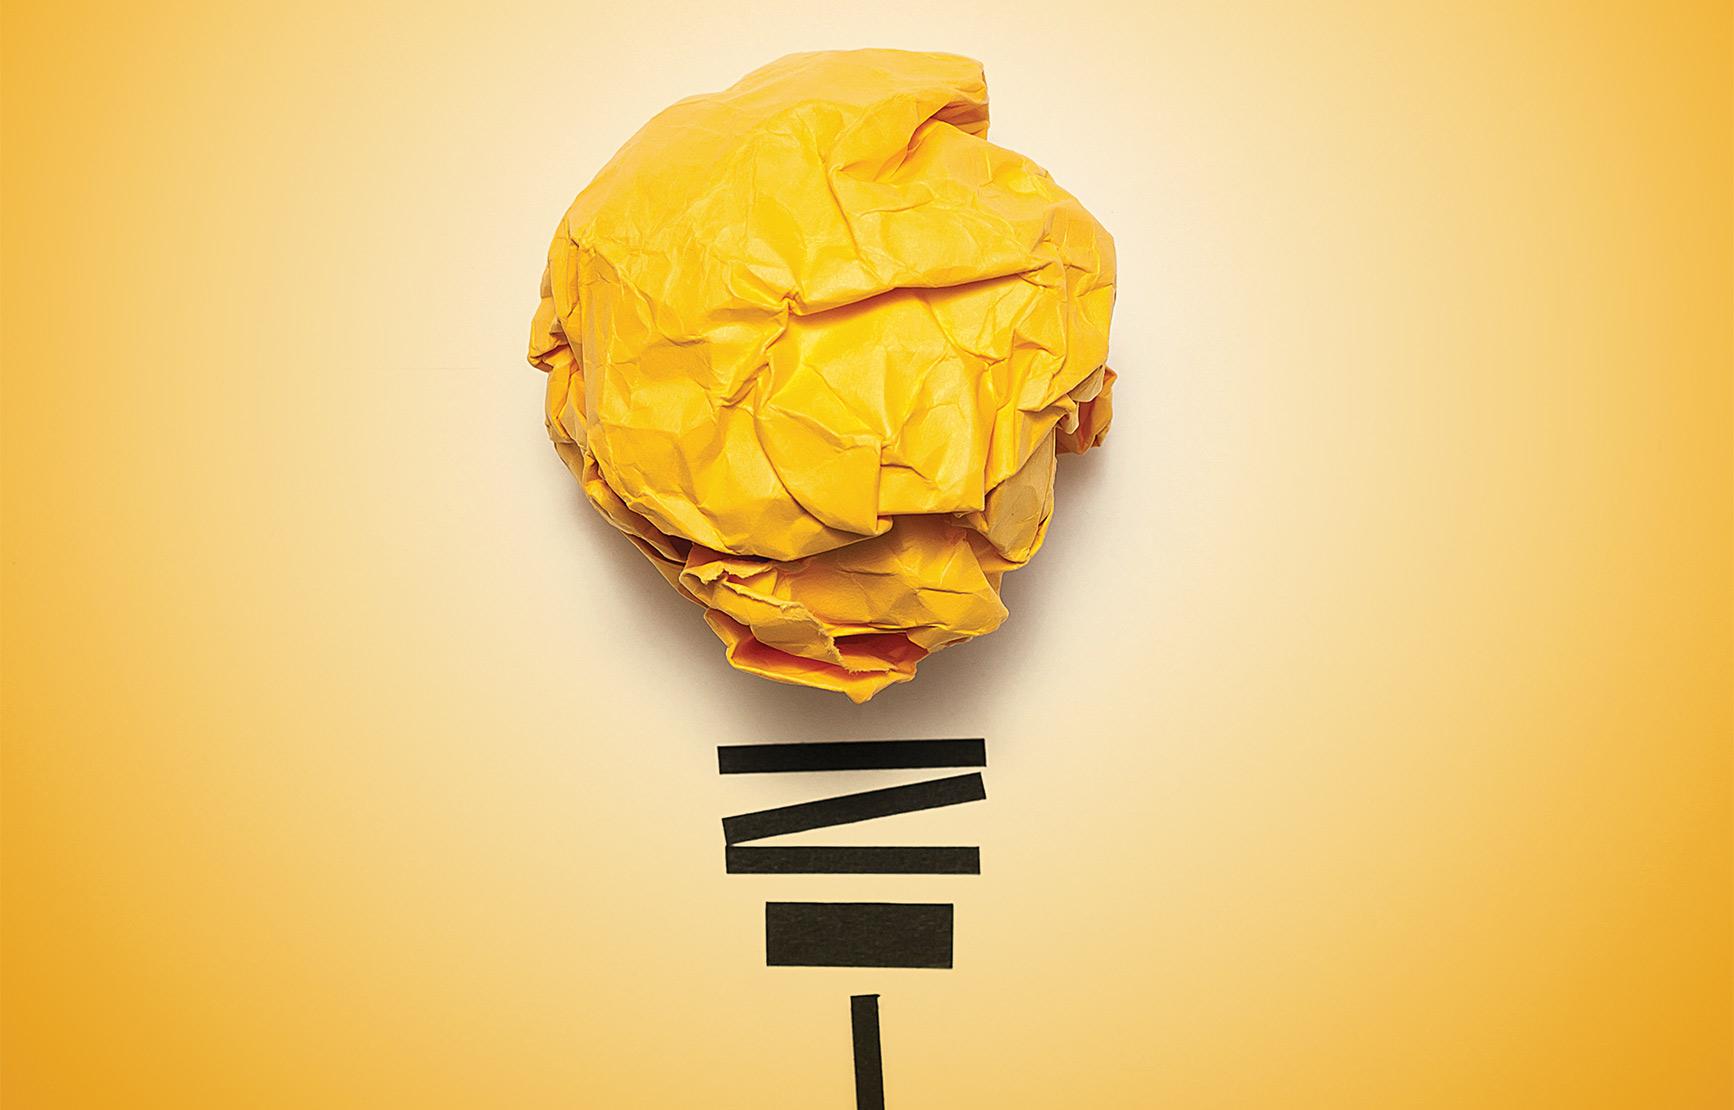 yellow crumpled paper and tape modeled as light bulb in front of yellow backdrop